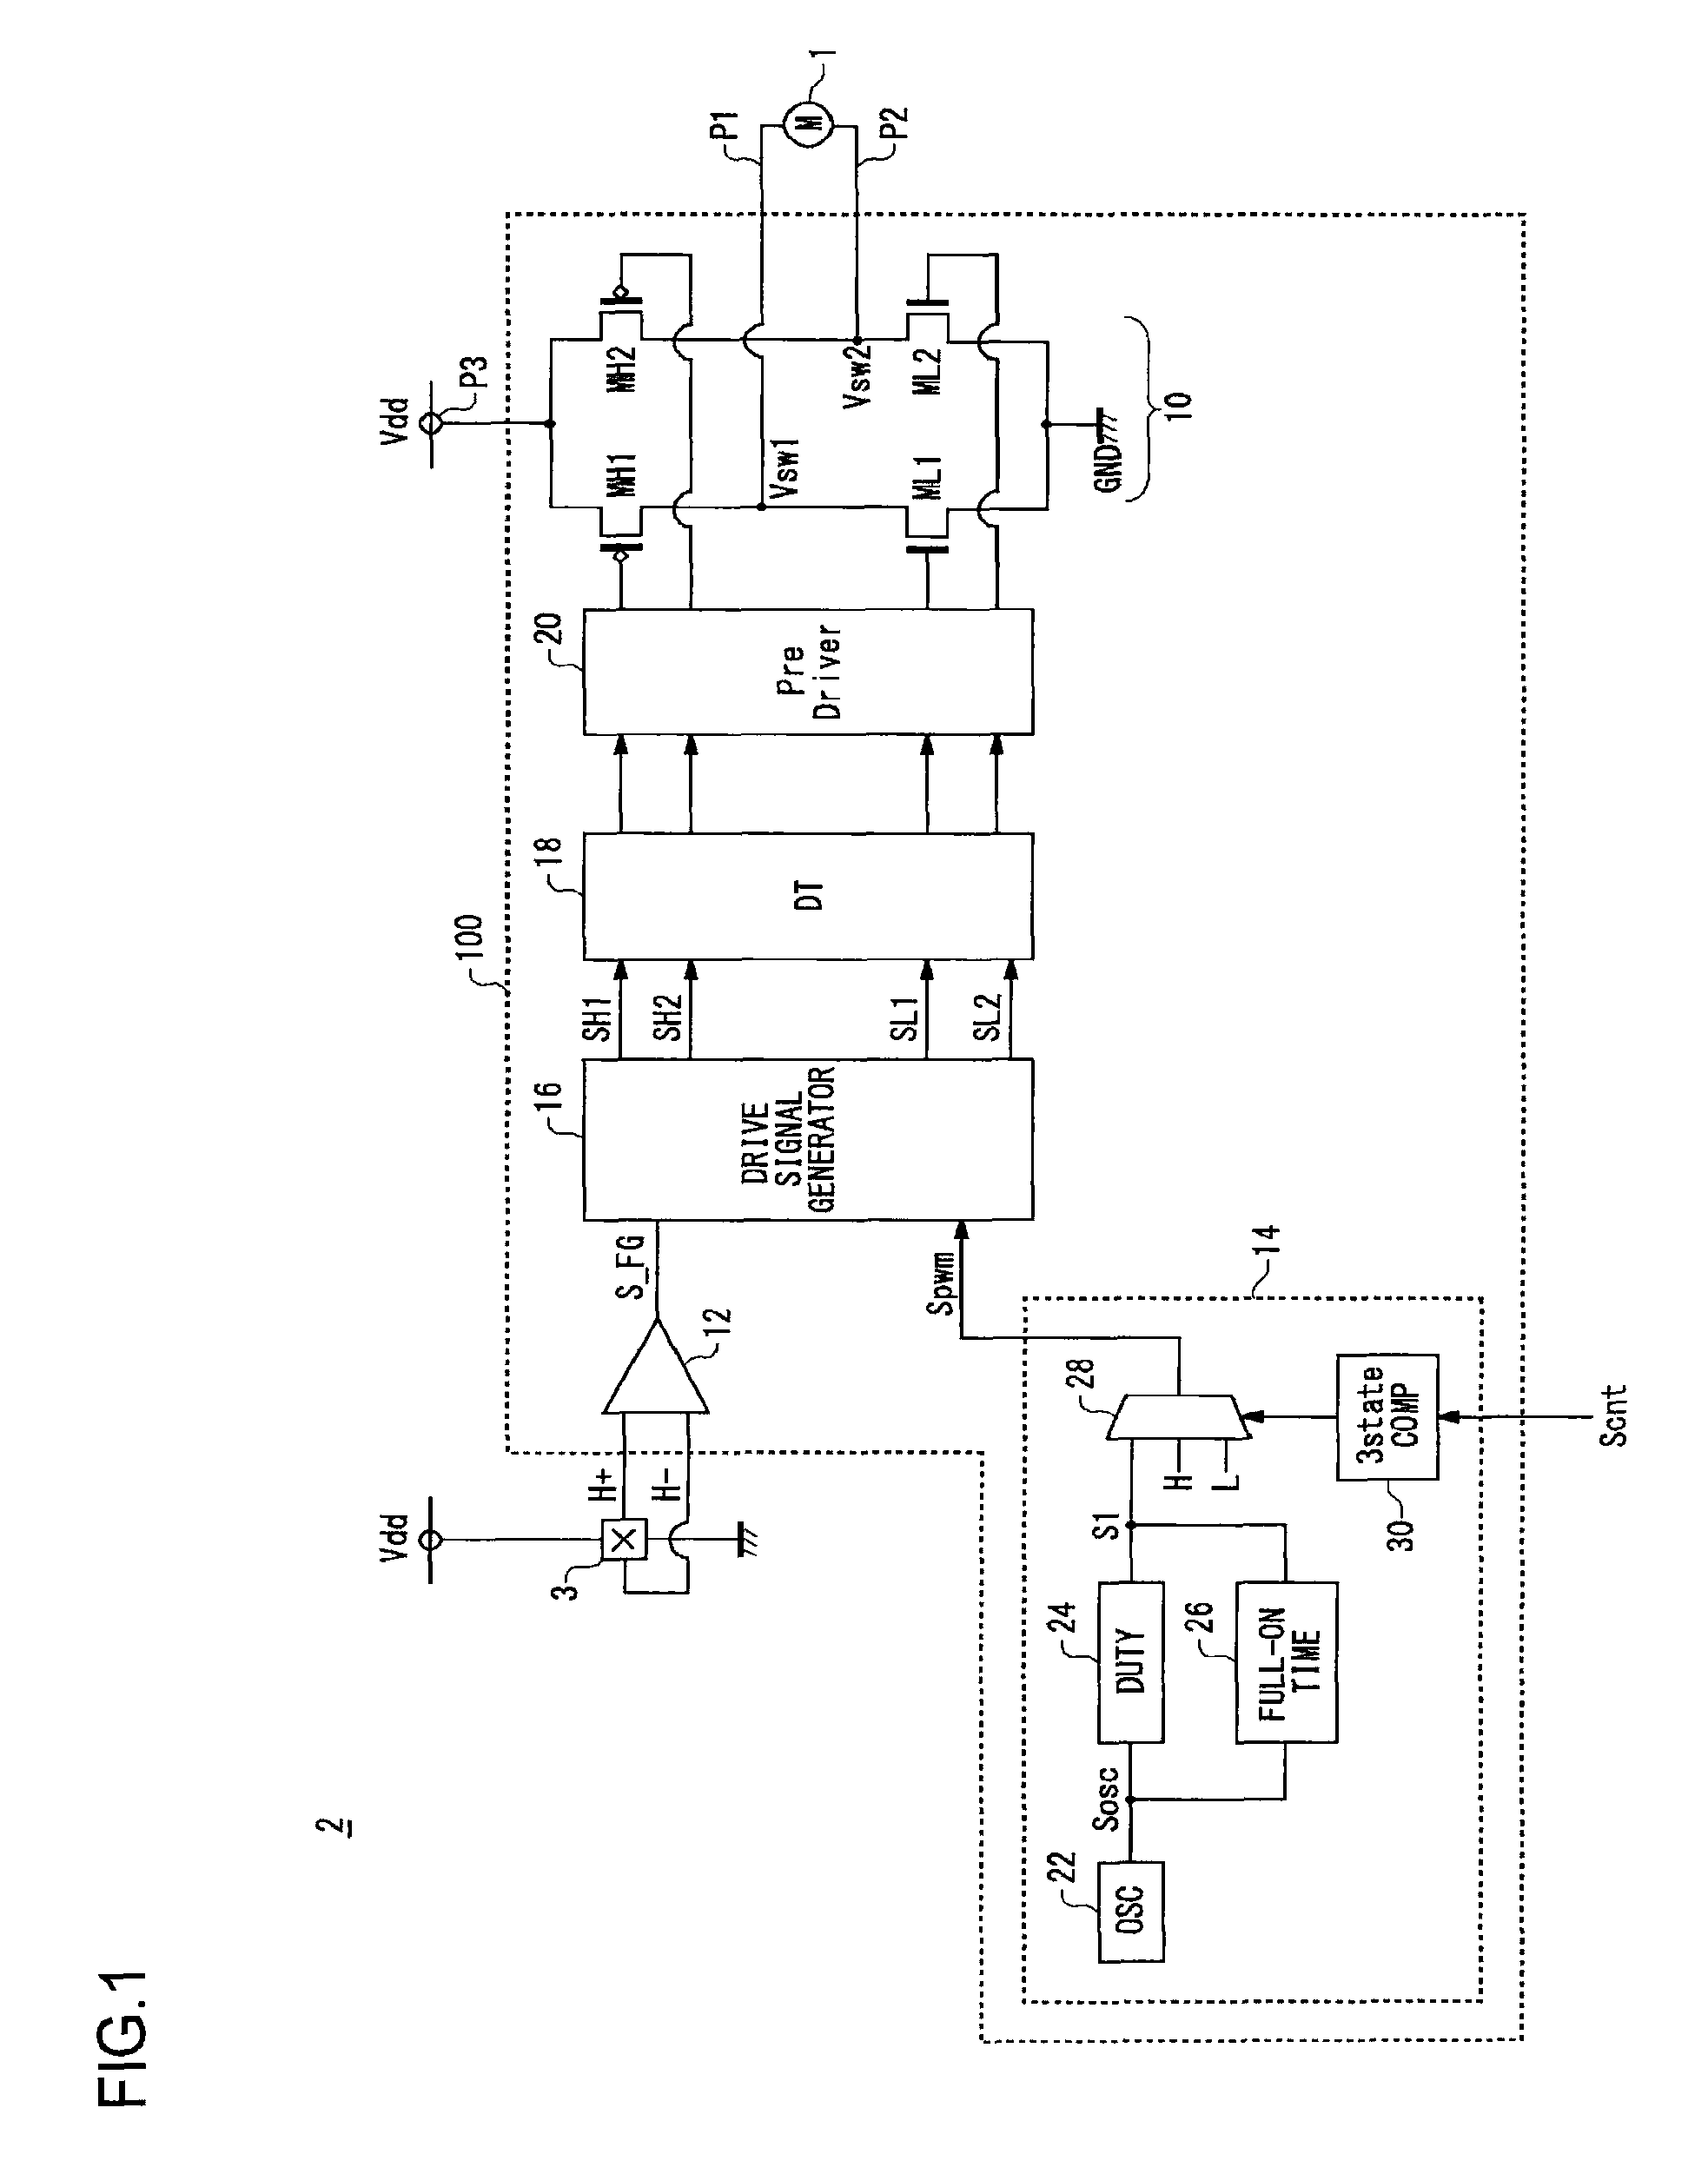 Motor drive circuit with short startup time